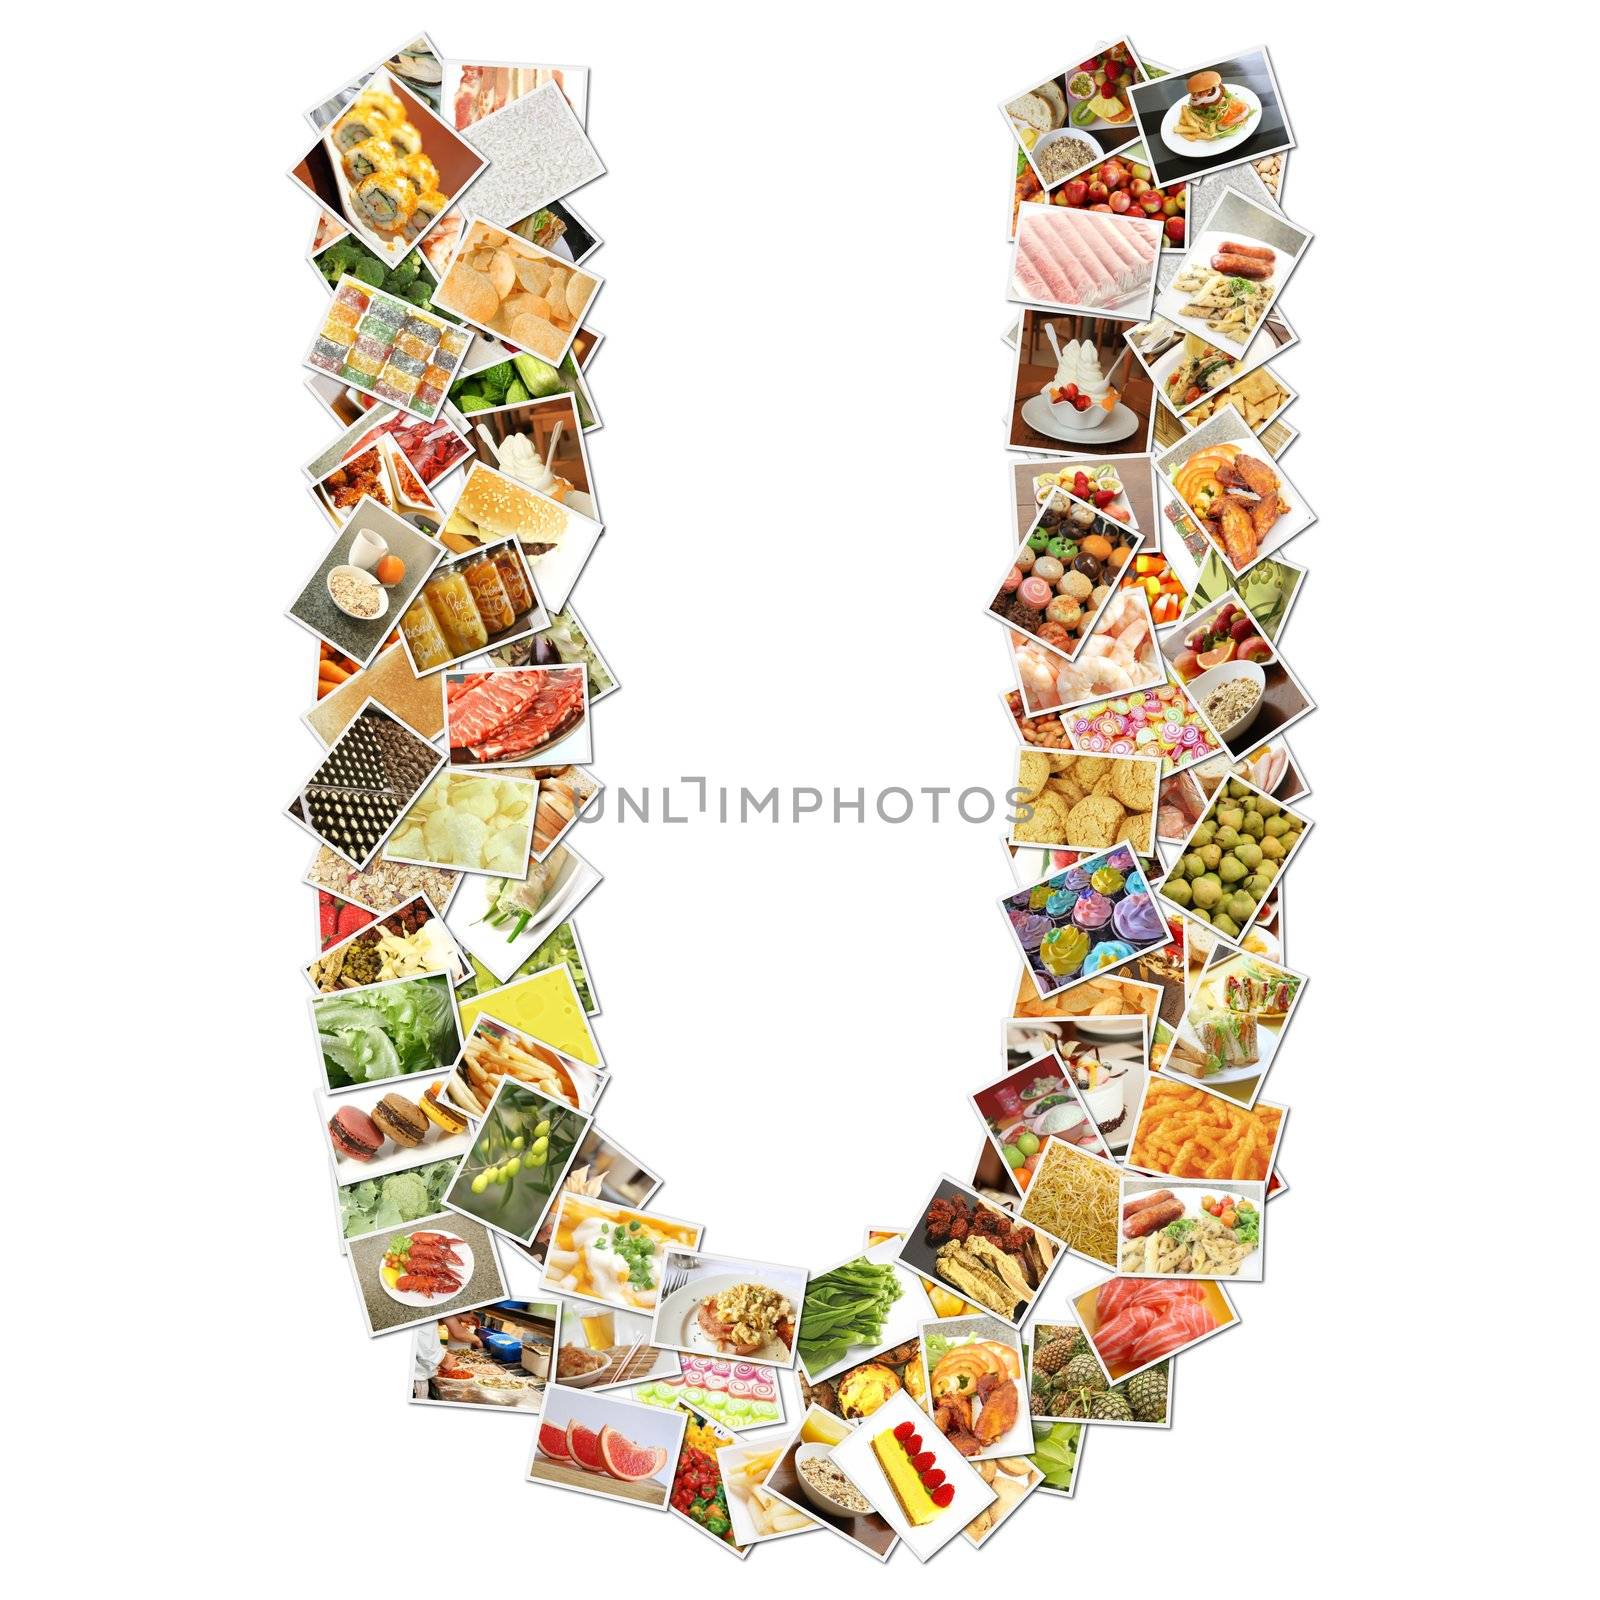 Letter U with Food Collage Concept Art